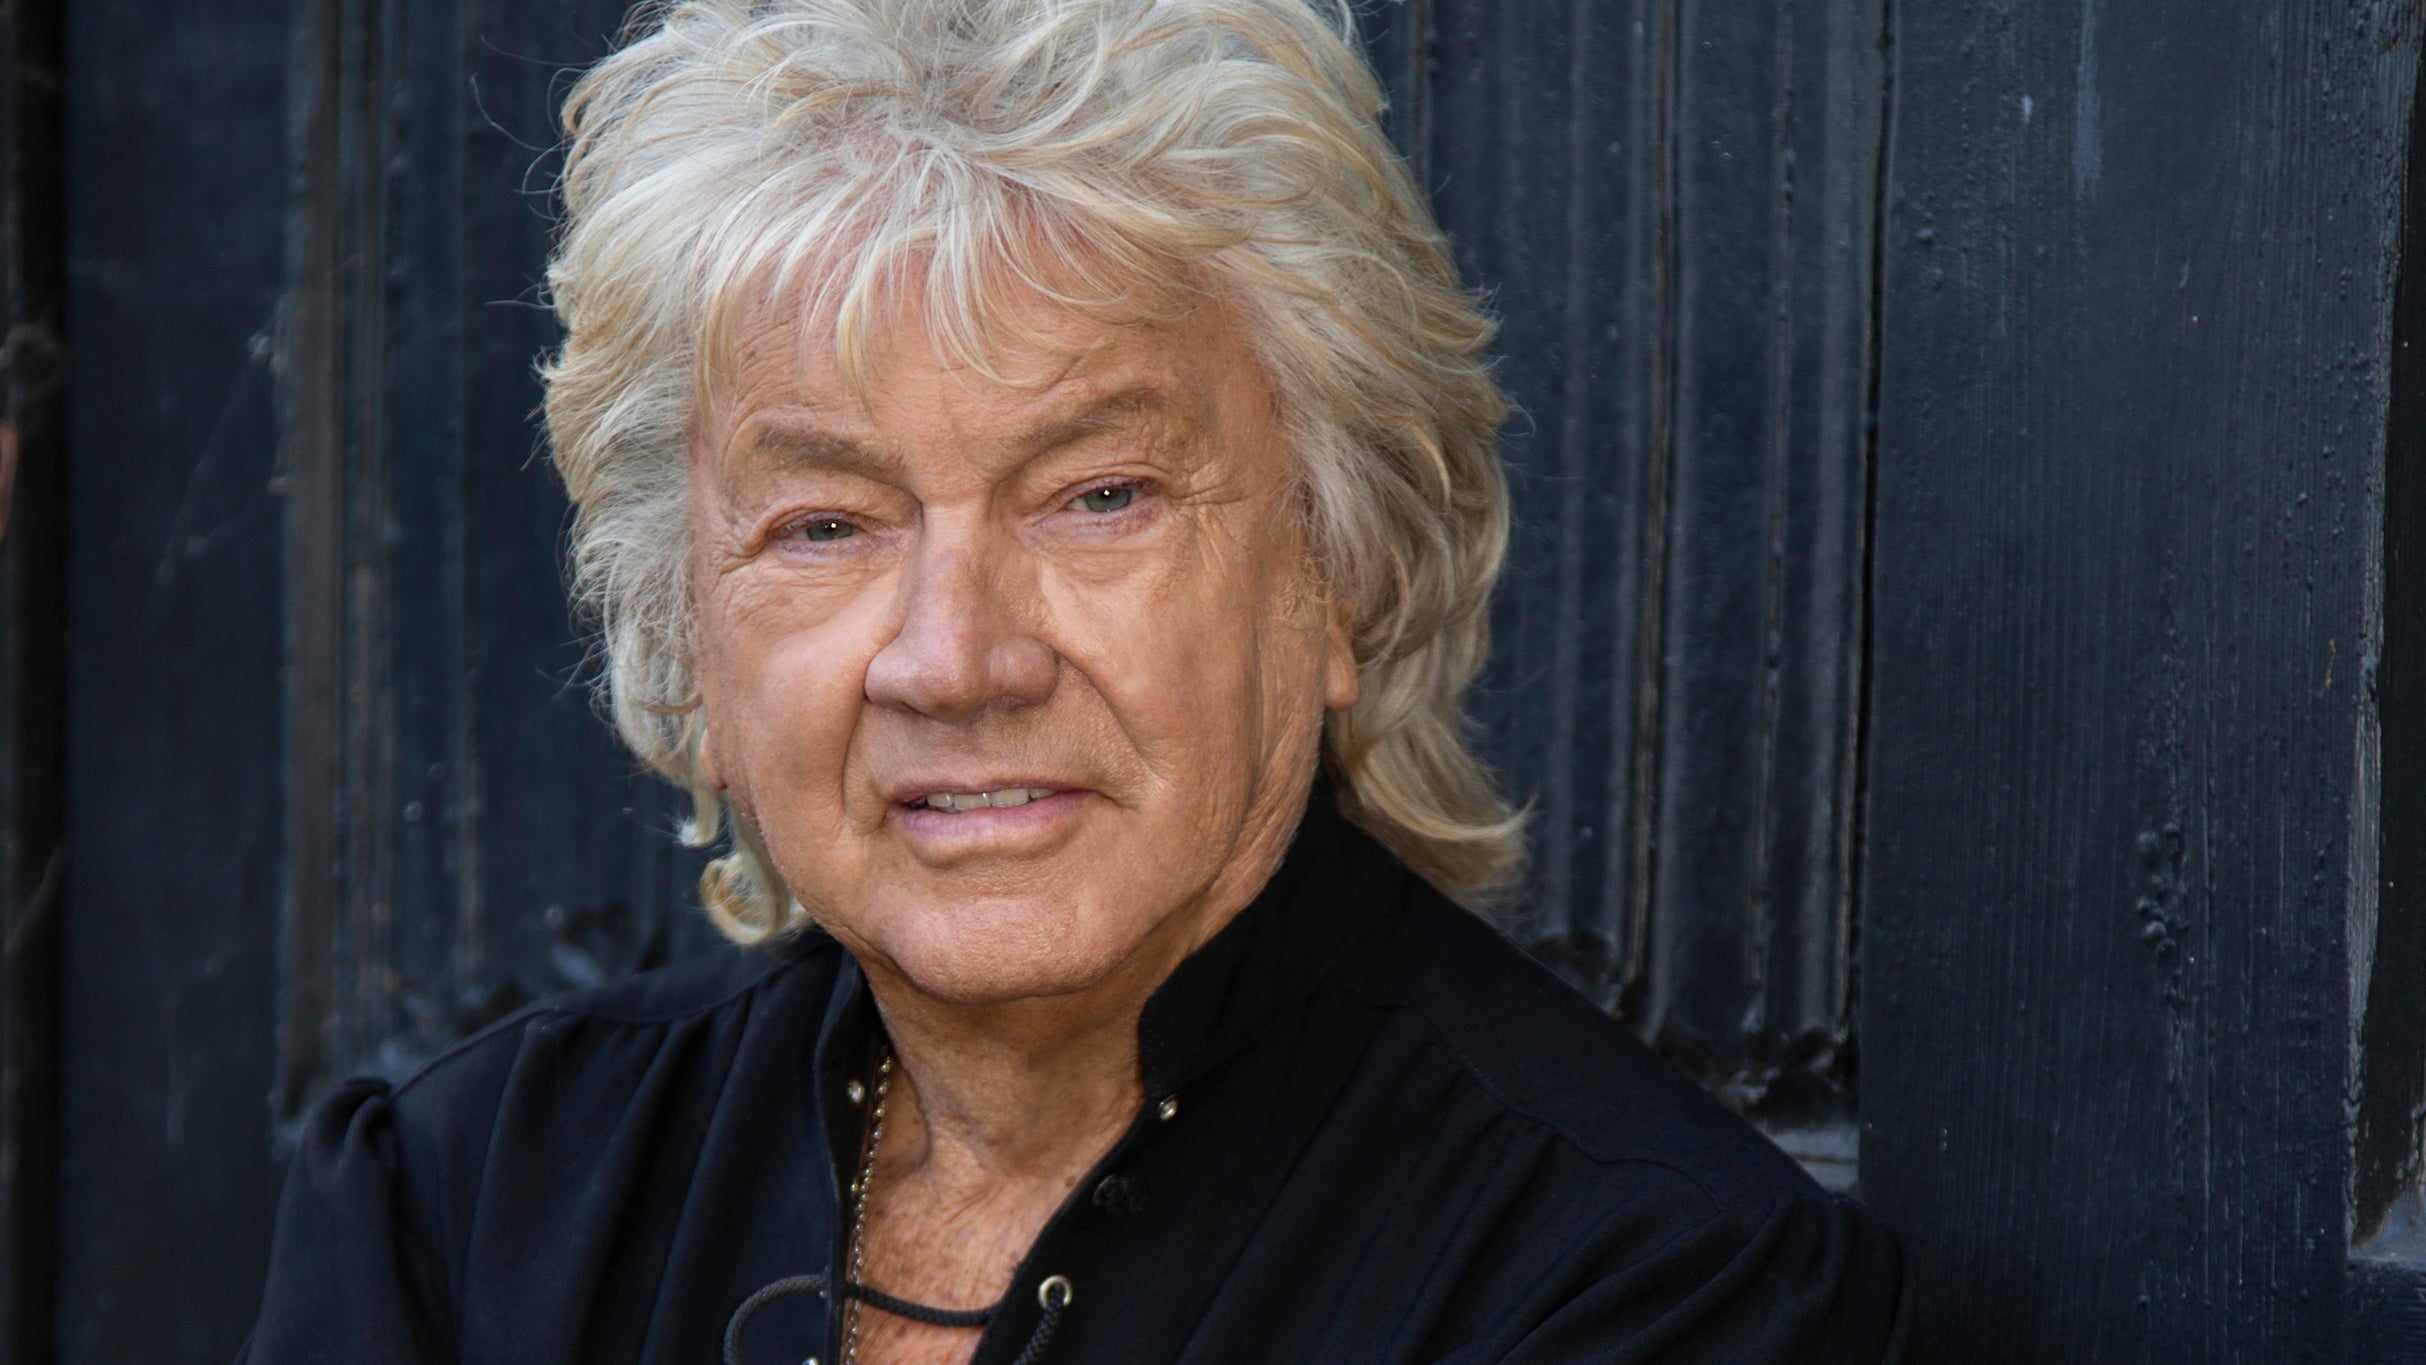 The Moody Blues' John Lodge in Ft Lauderdale promo photo for AEG presale offer code